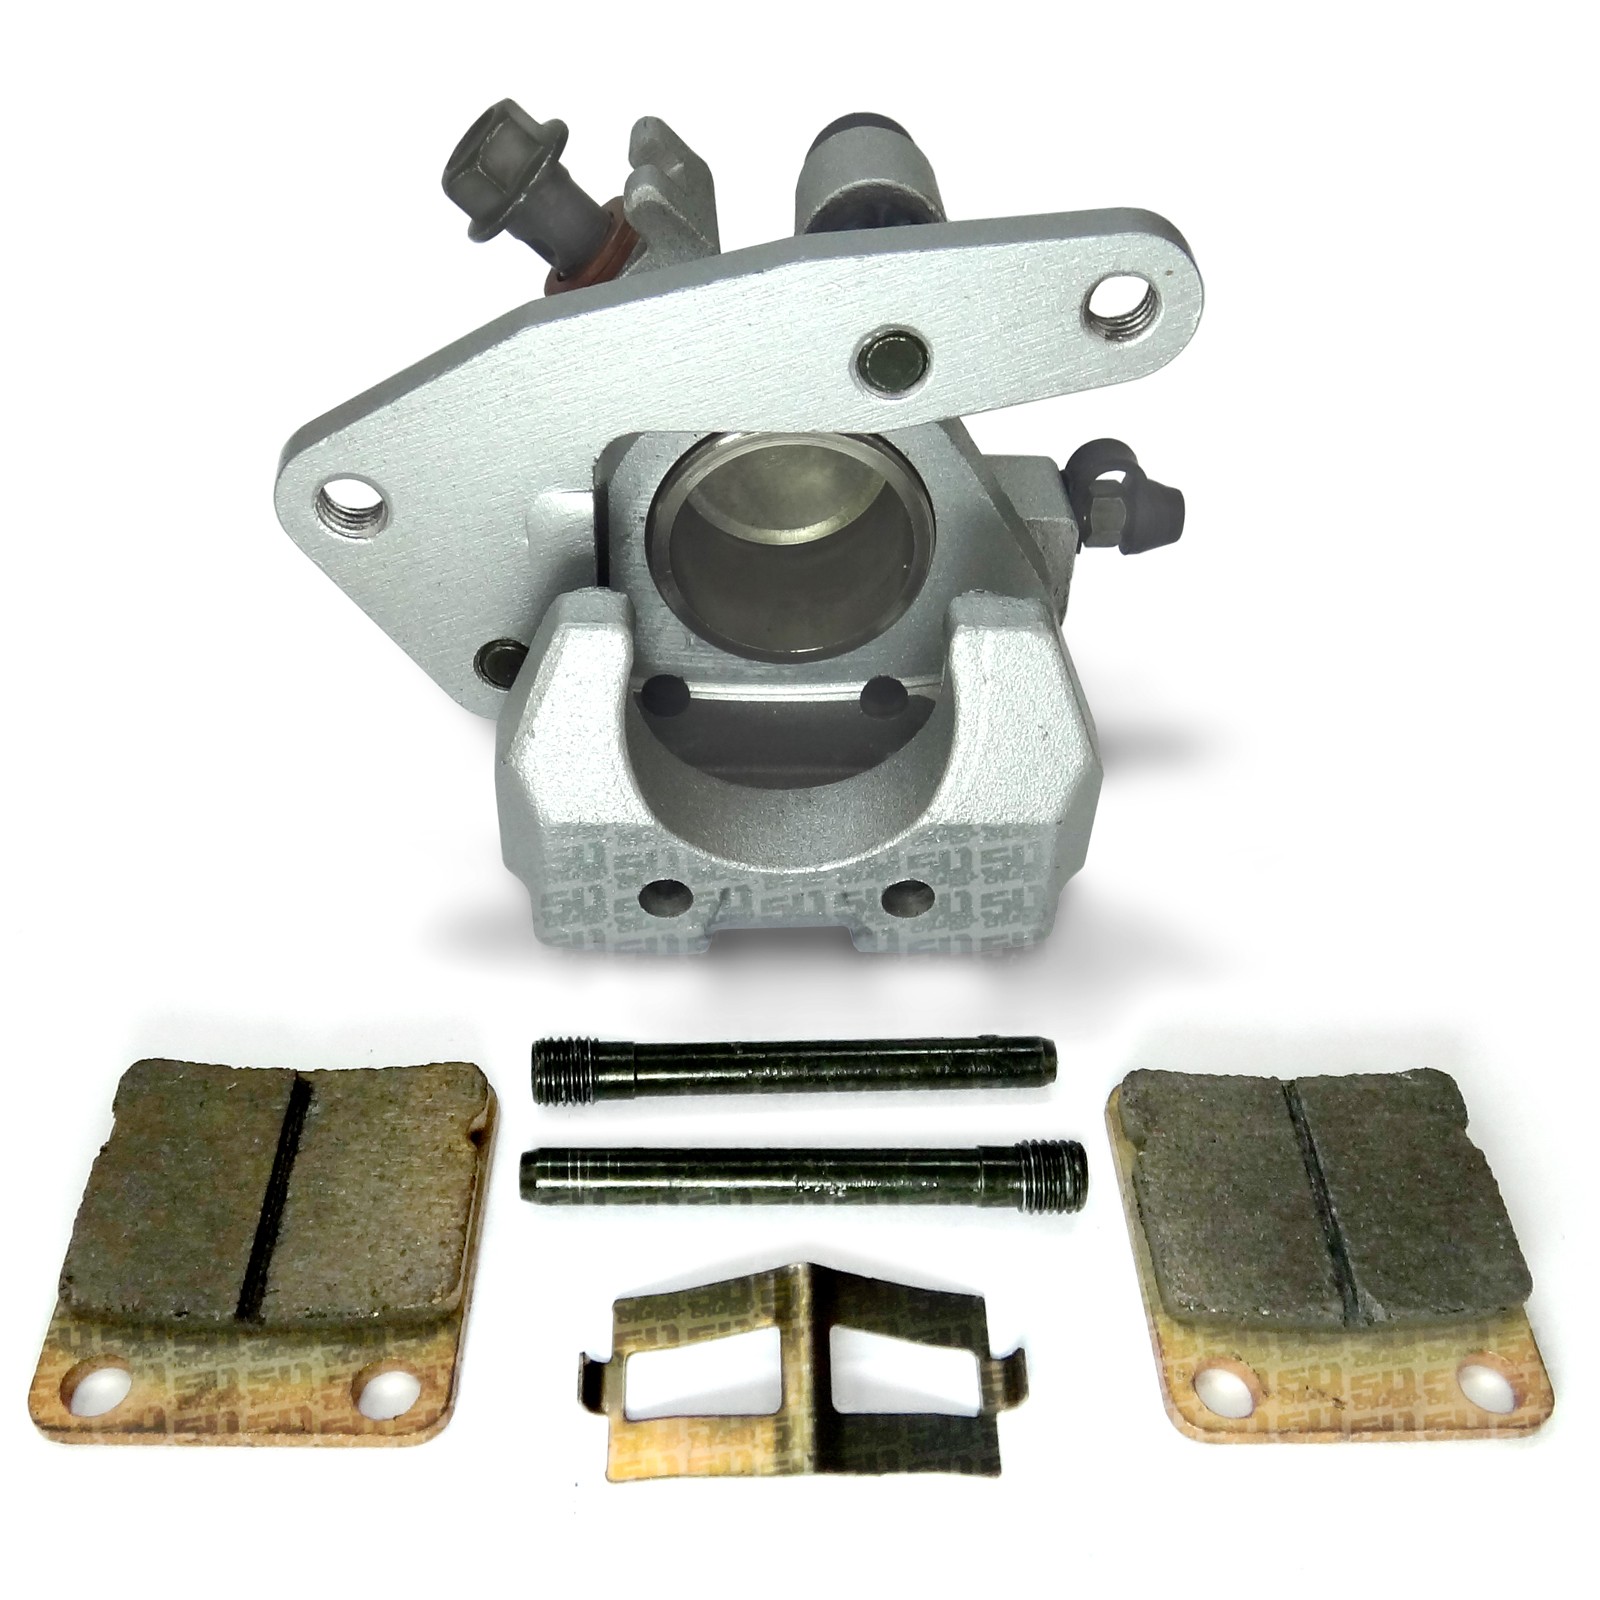 Details about   1 New Front Brake Caliper Set Fits YAMAHA GRIZZLY 660 2002-2008 YFM660 WITH PADS